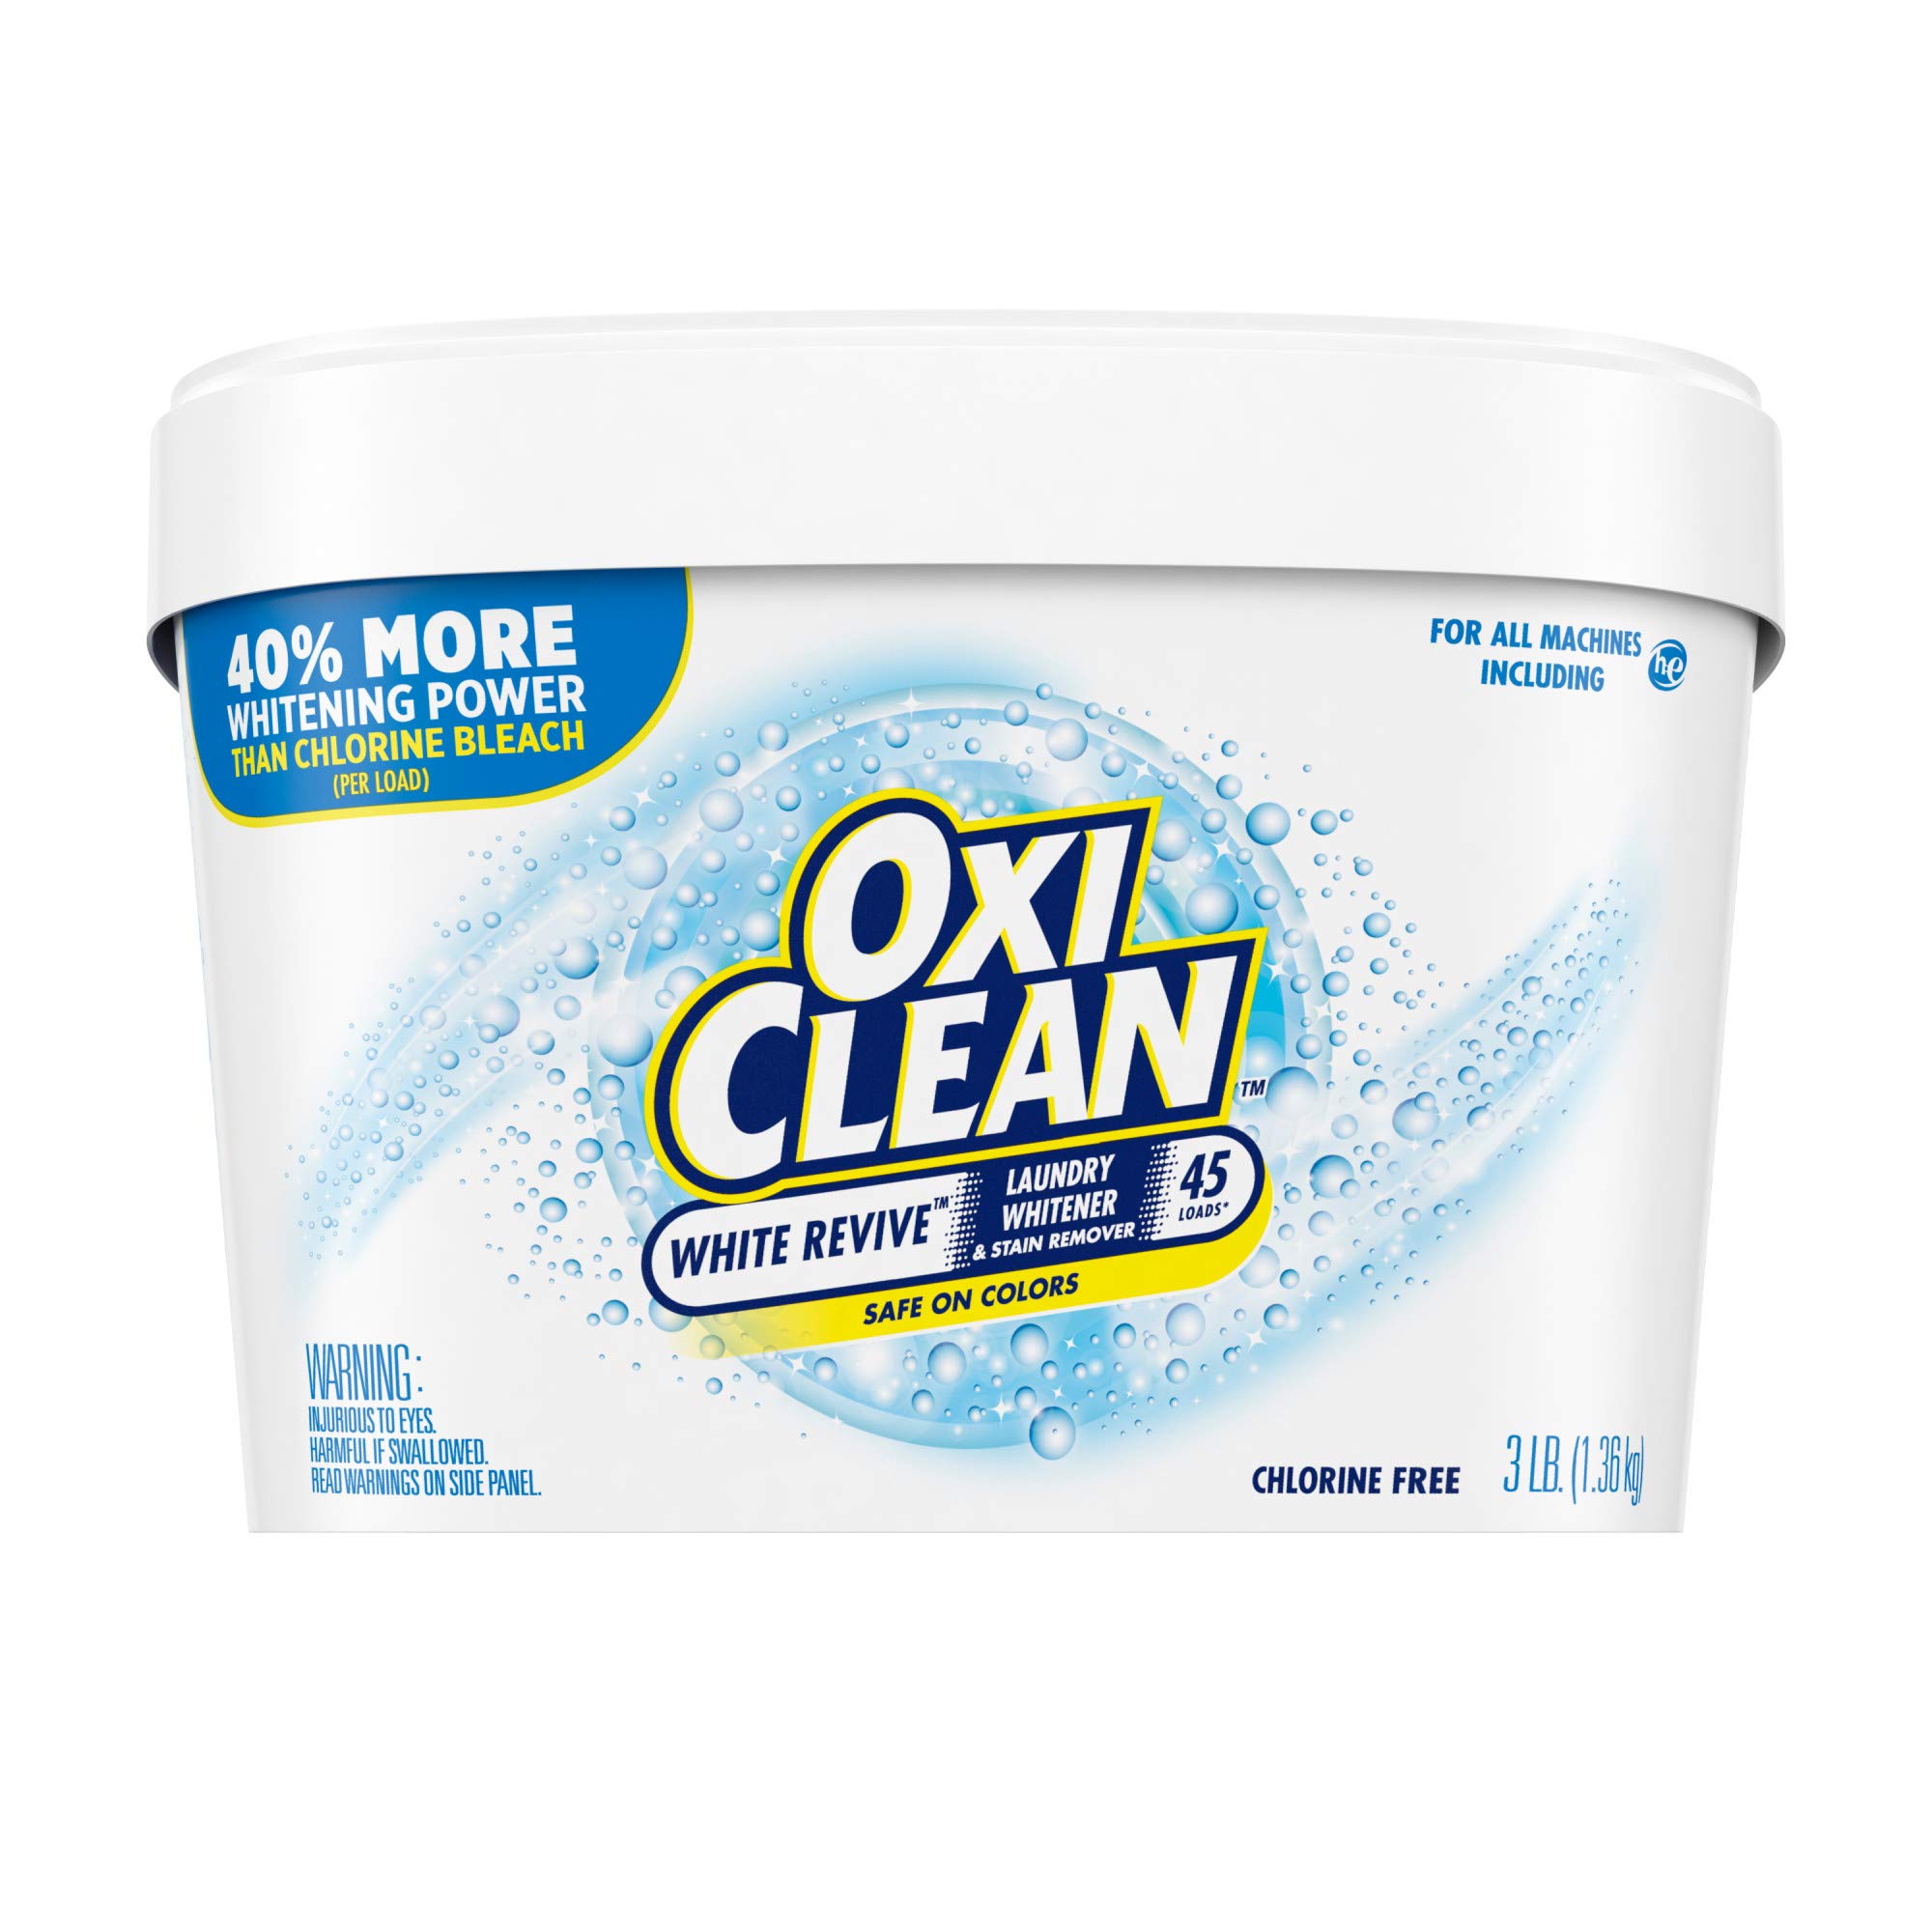 OxiClean White Revive Laundry Whitener + Stain Remover 3 lbs.